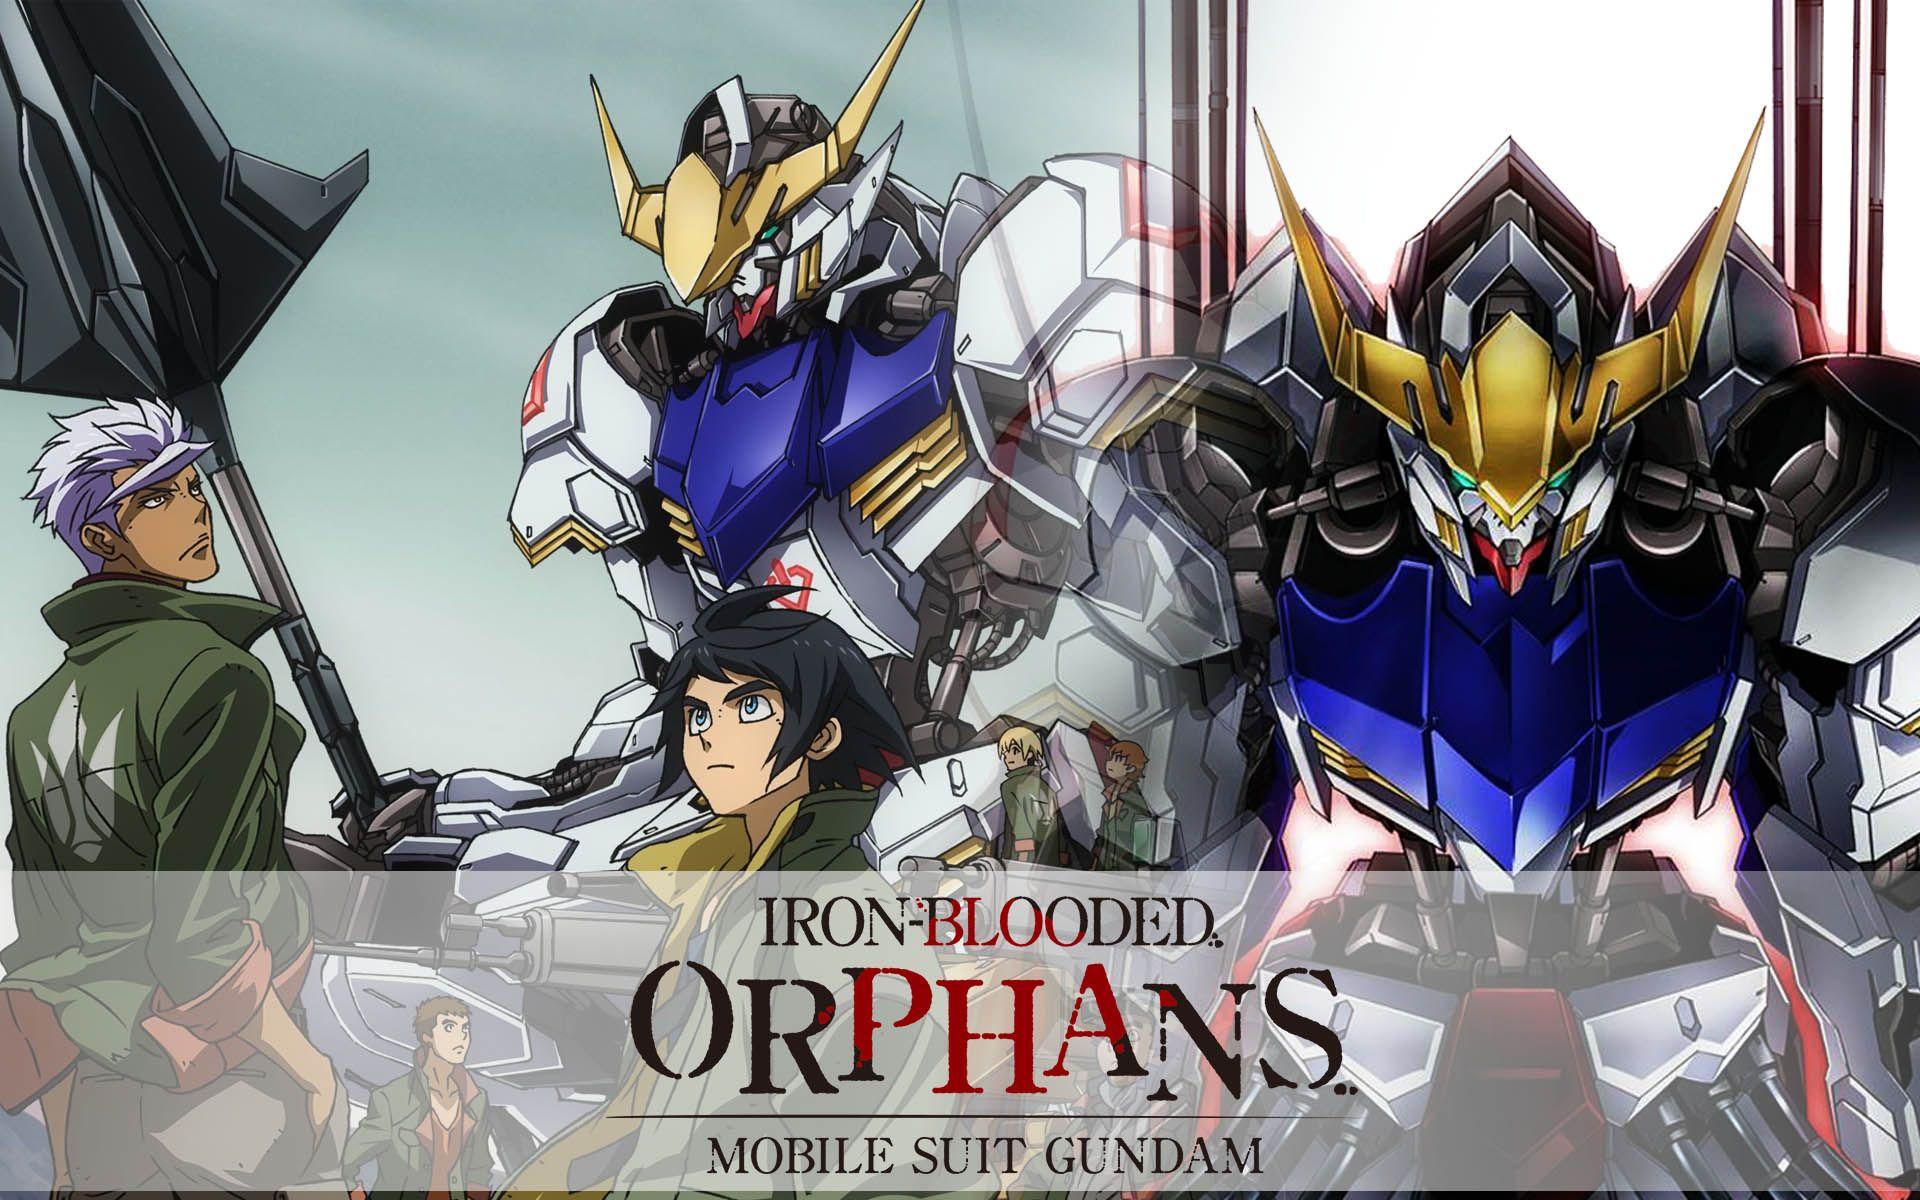 Mobile Suit Gundam IronBlooded Orphans 2015